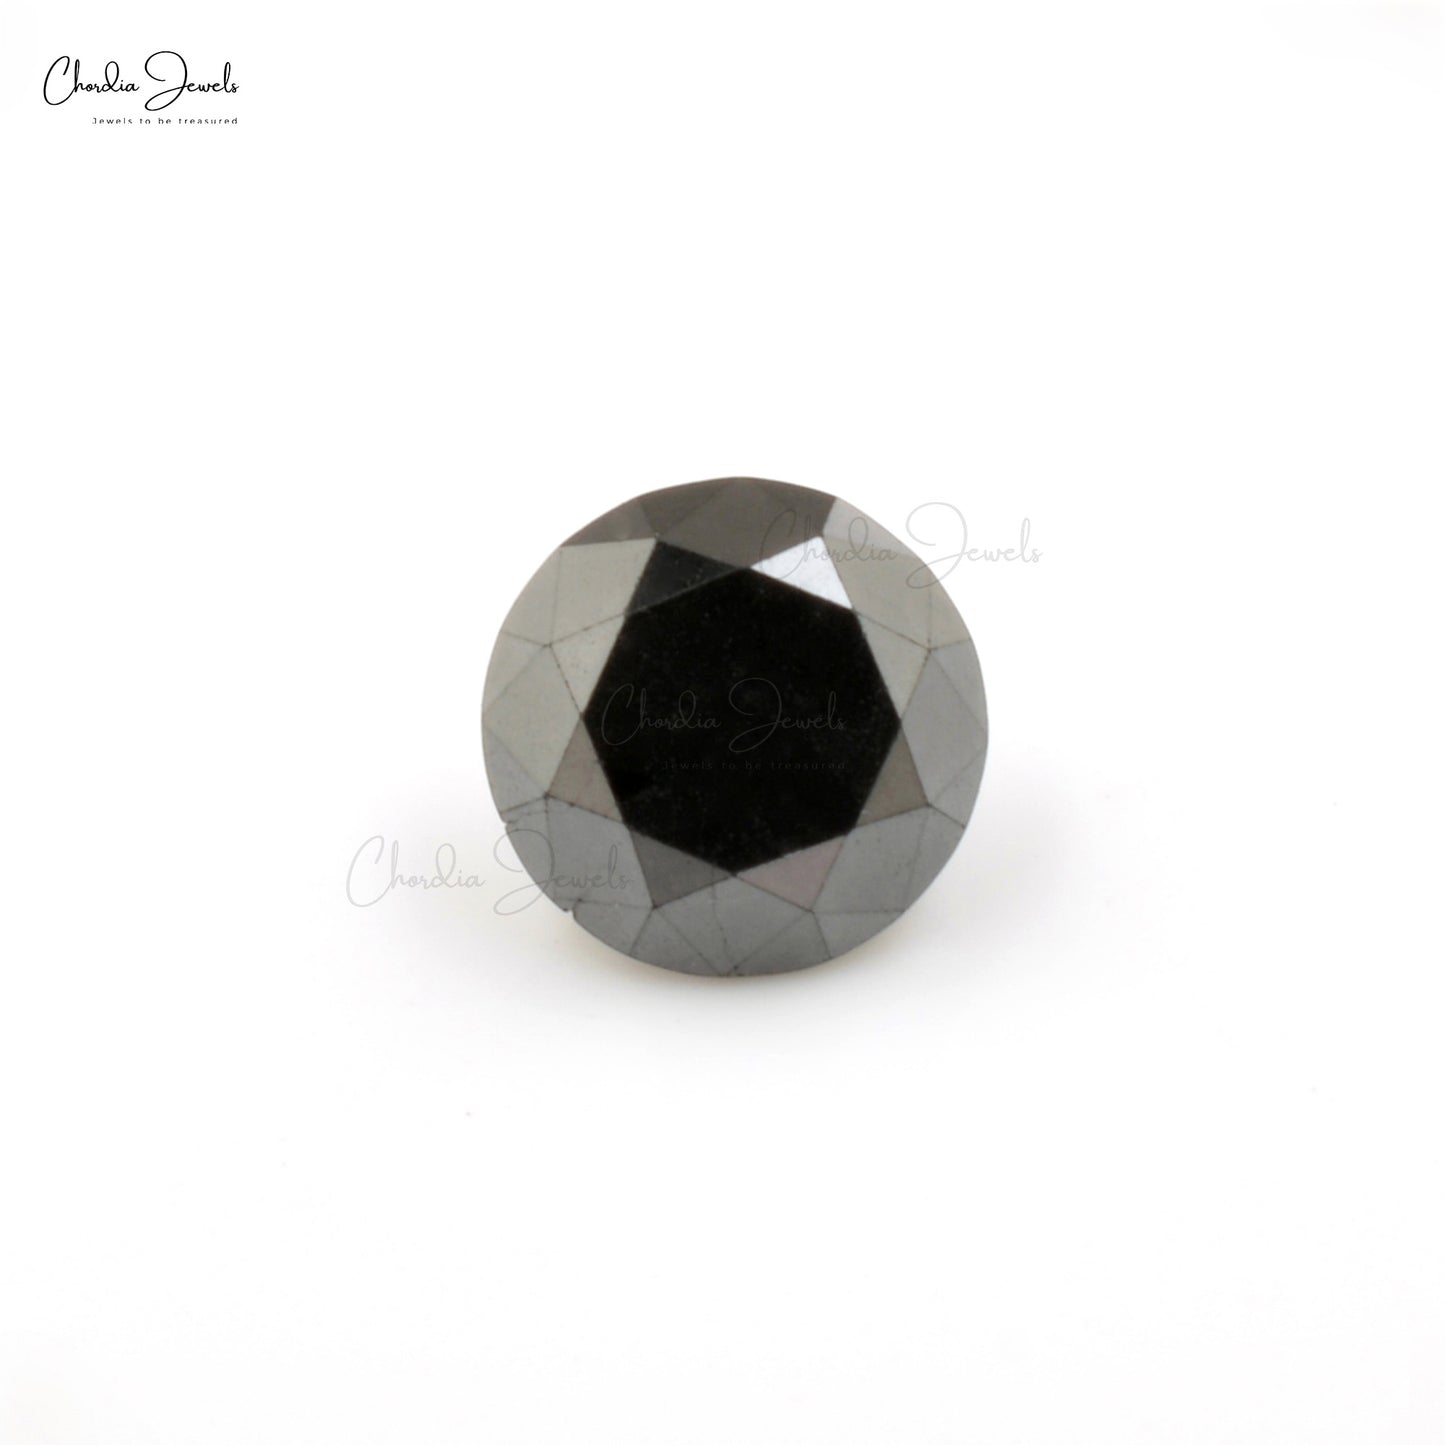 Load image into Gallery viewer, Black Diamond Round Cut Faceted 4 MM Precious Gemstone, 1 Piece
